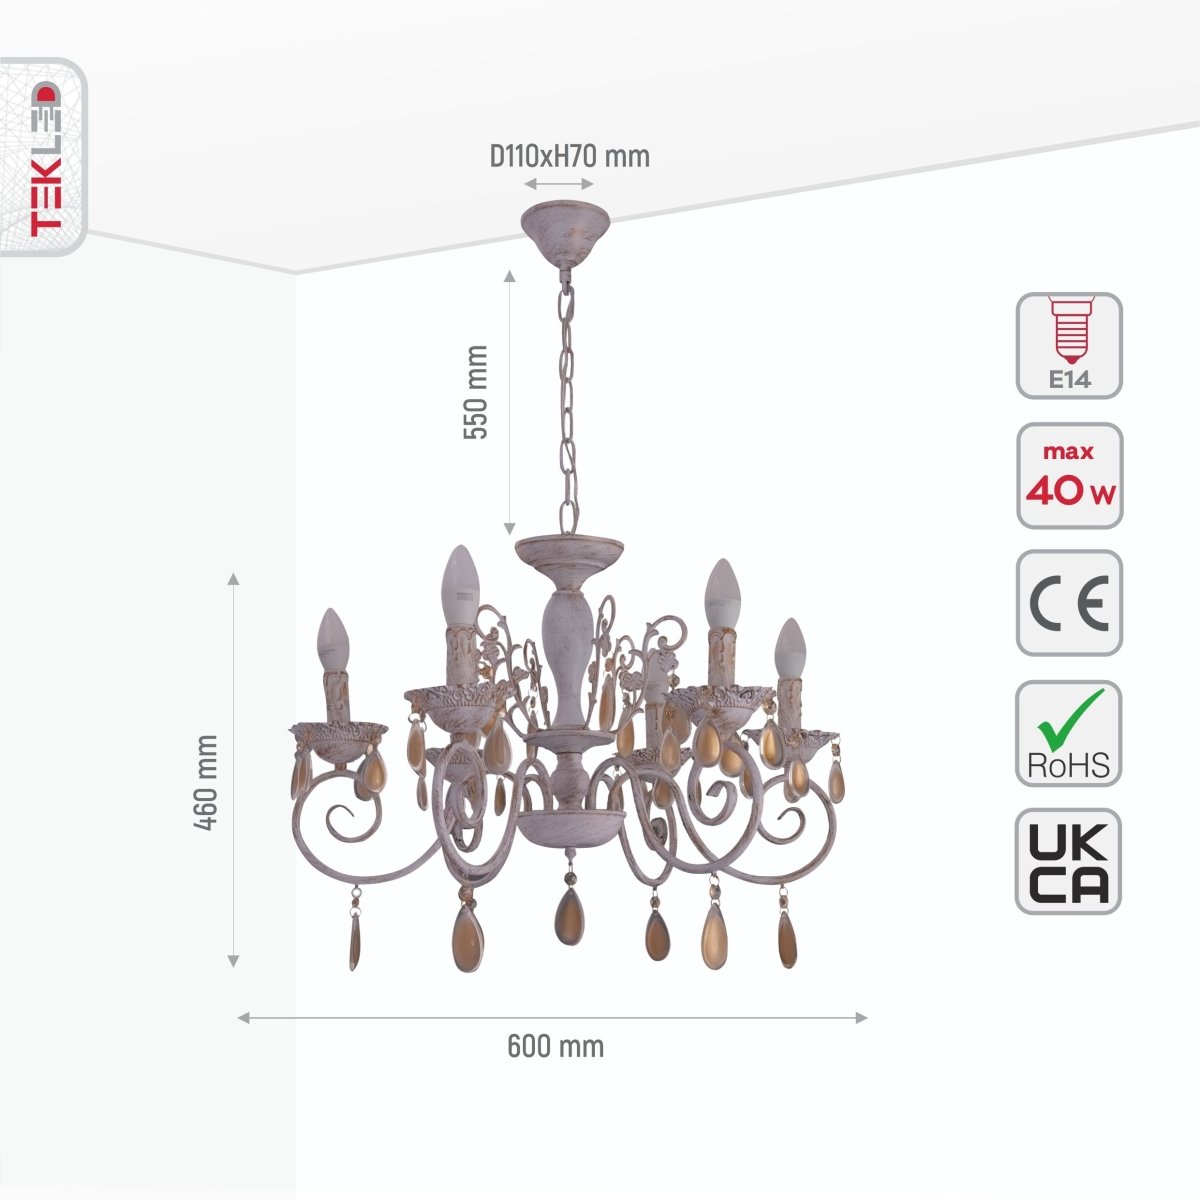 Size and specs of Amber Crystals Rice White with Gold Brushed Metal 6 Arm Chandelier with E14 Fitting | TEKLED 158-17850